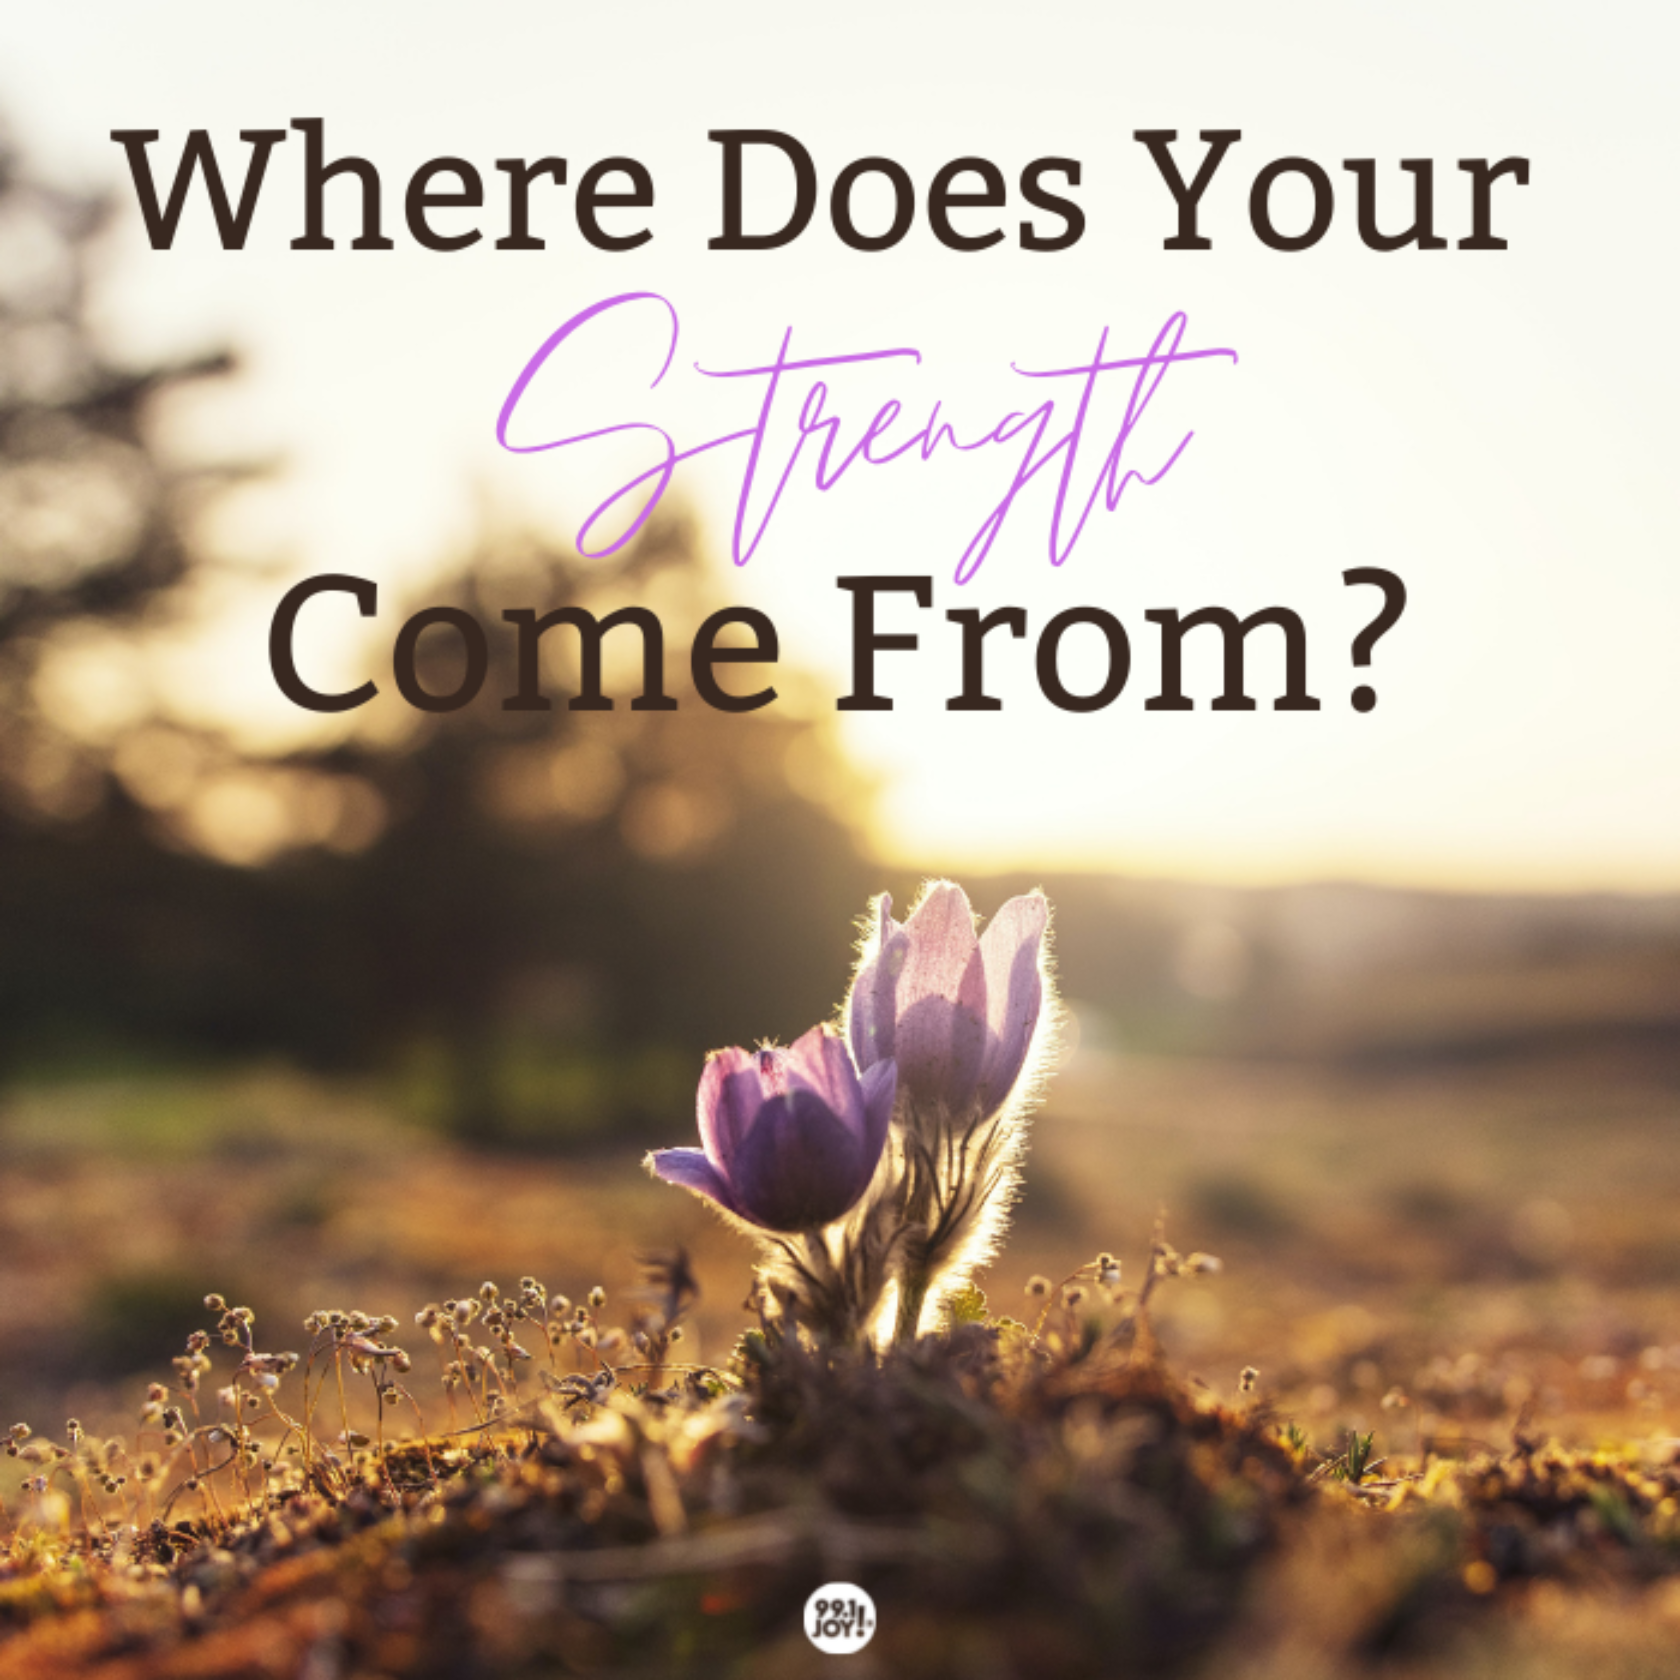 Where Does Your Strength Come From?